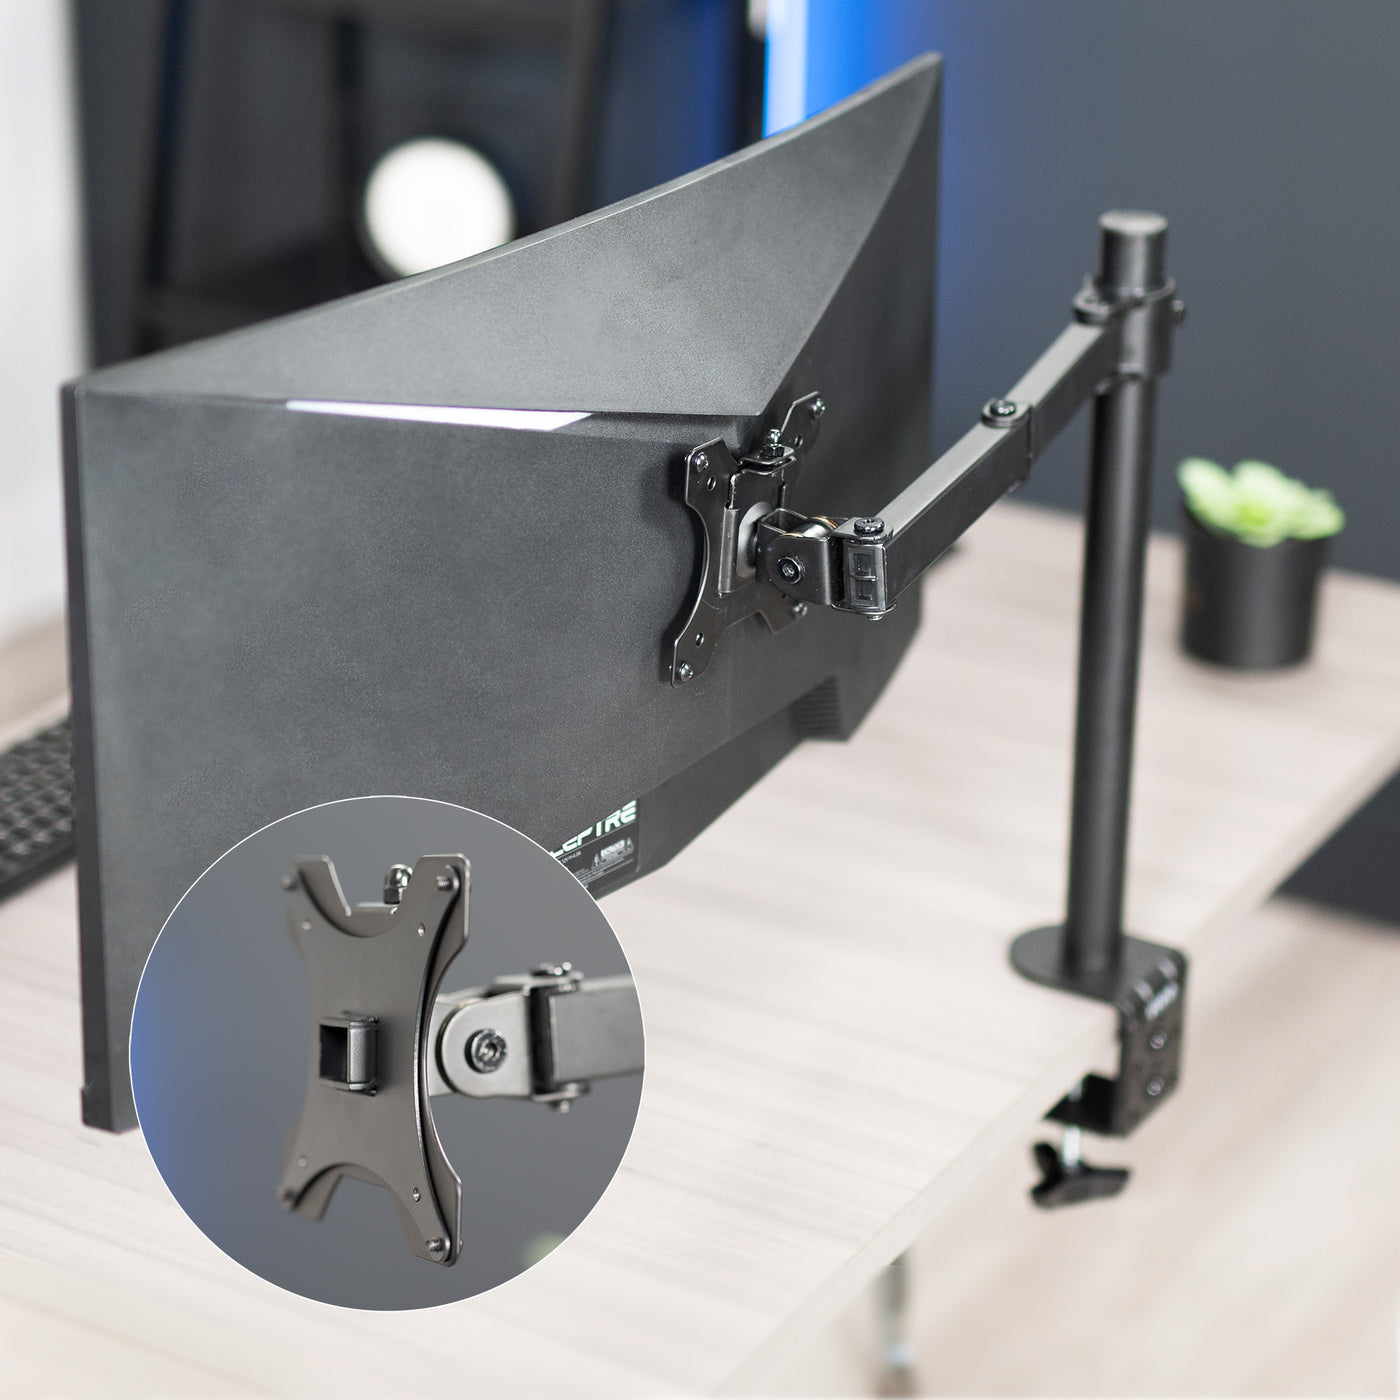 VESA Adapter Bracket Designed for Sceptre C25, C30, C34 Monitors gives your compatible screen VESA capability for more mounting options.